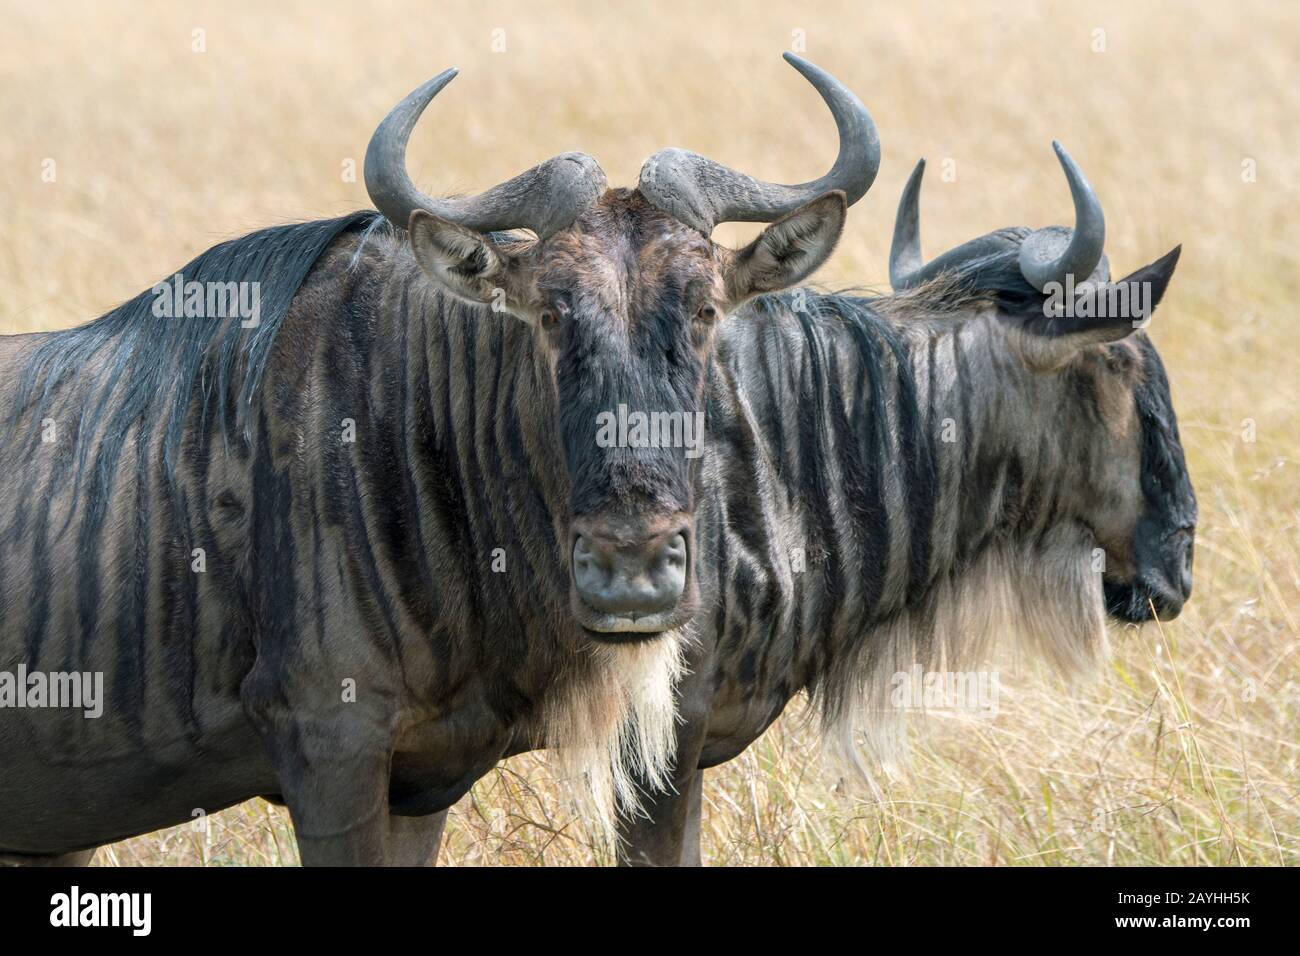 Close-up of a Wildebeest, also called gnus or wildebai, in the grasslands of the Masai Mara in Kenya. Stock Photo